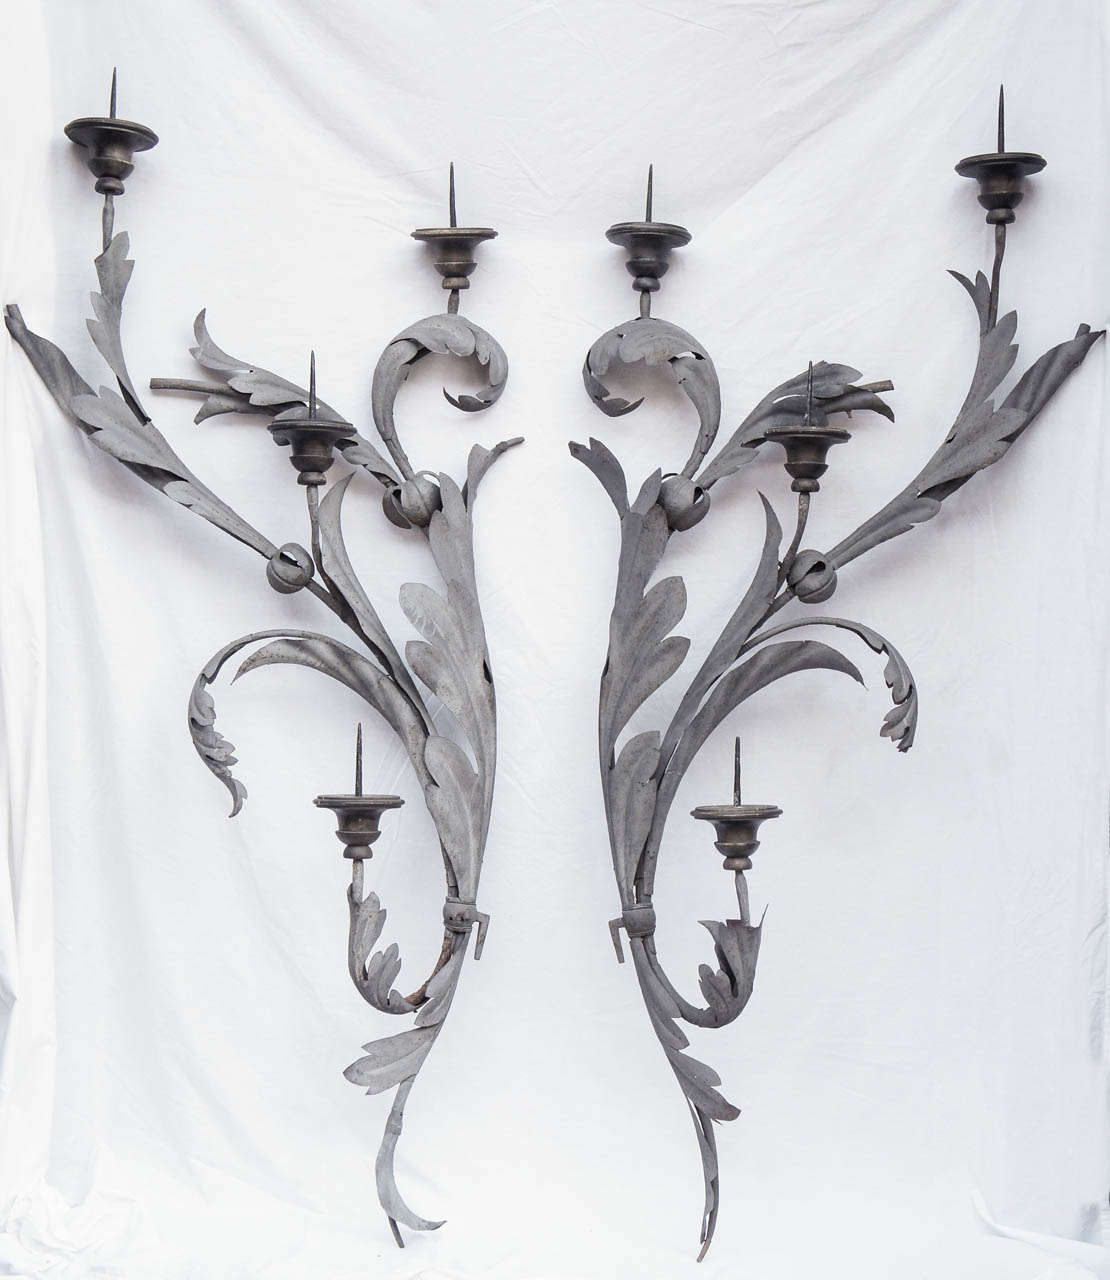 This large pair of four light pricket sconces created from wrought Iron and forged iron with wood sections for the candles to rest on are most likely Italian but could be French as well. The metal work hand forged looks very similar in both